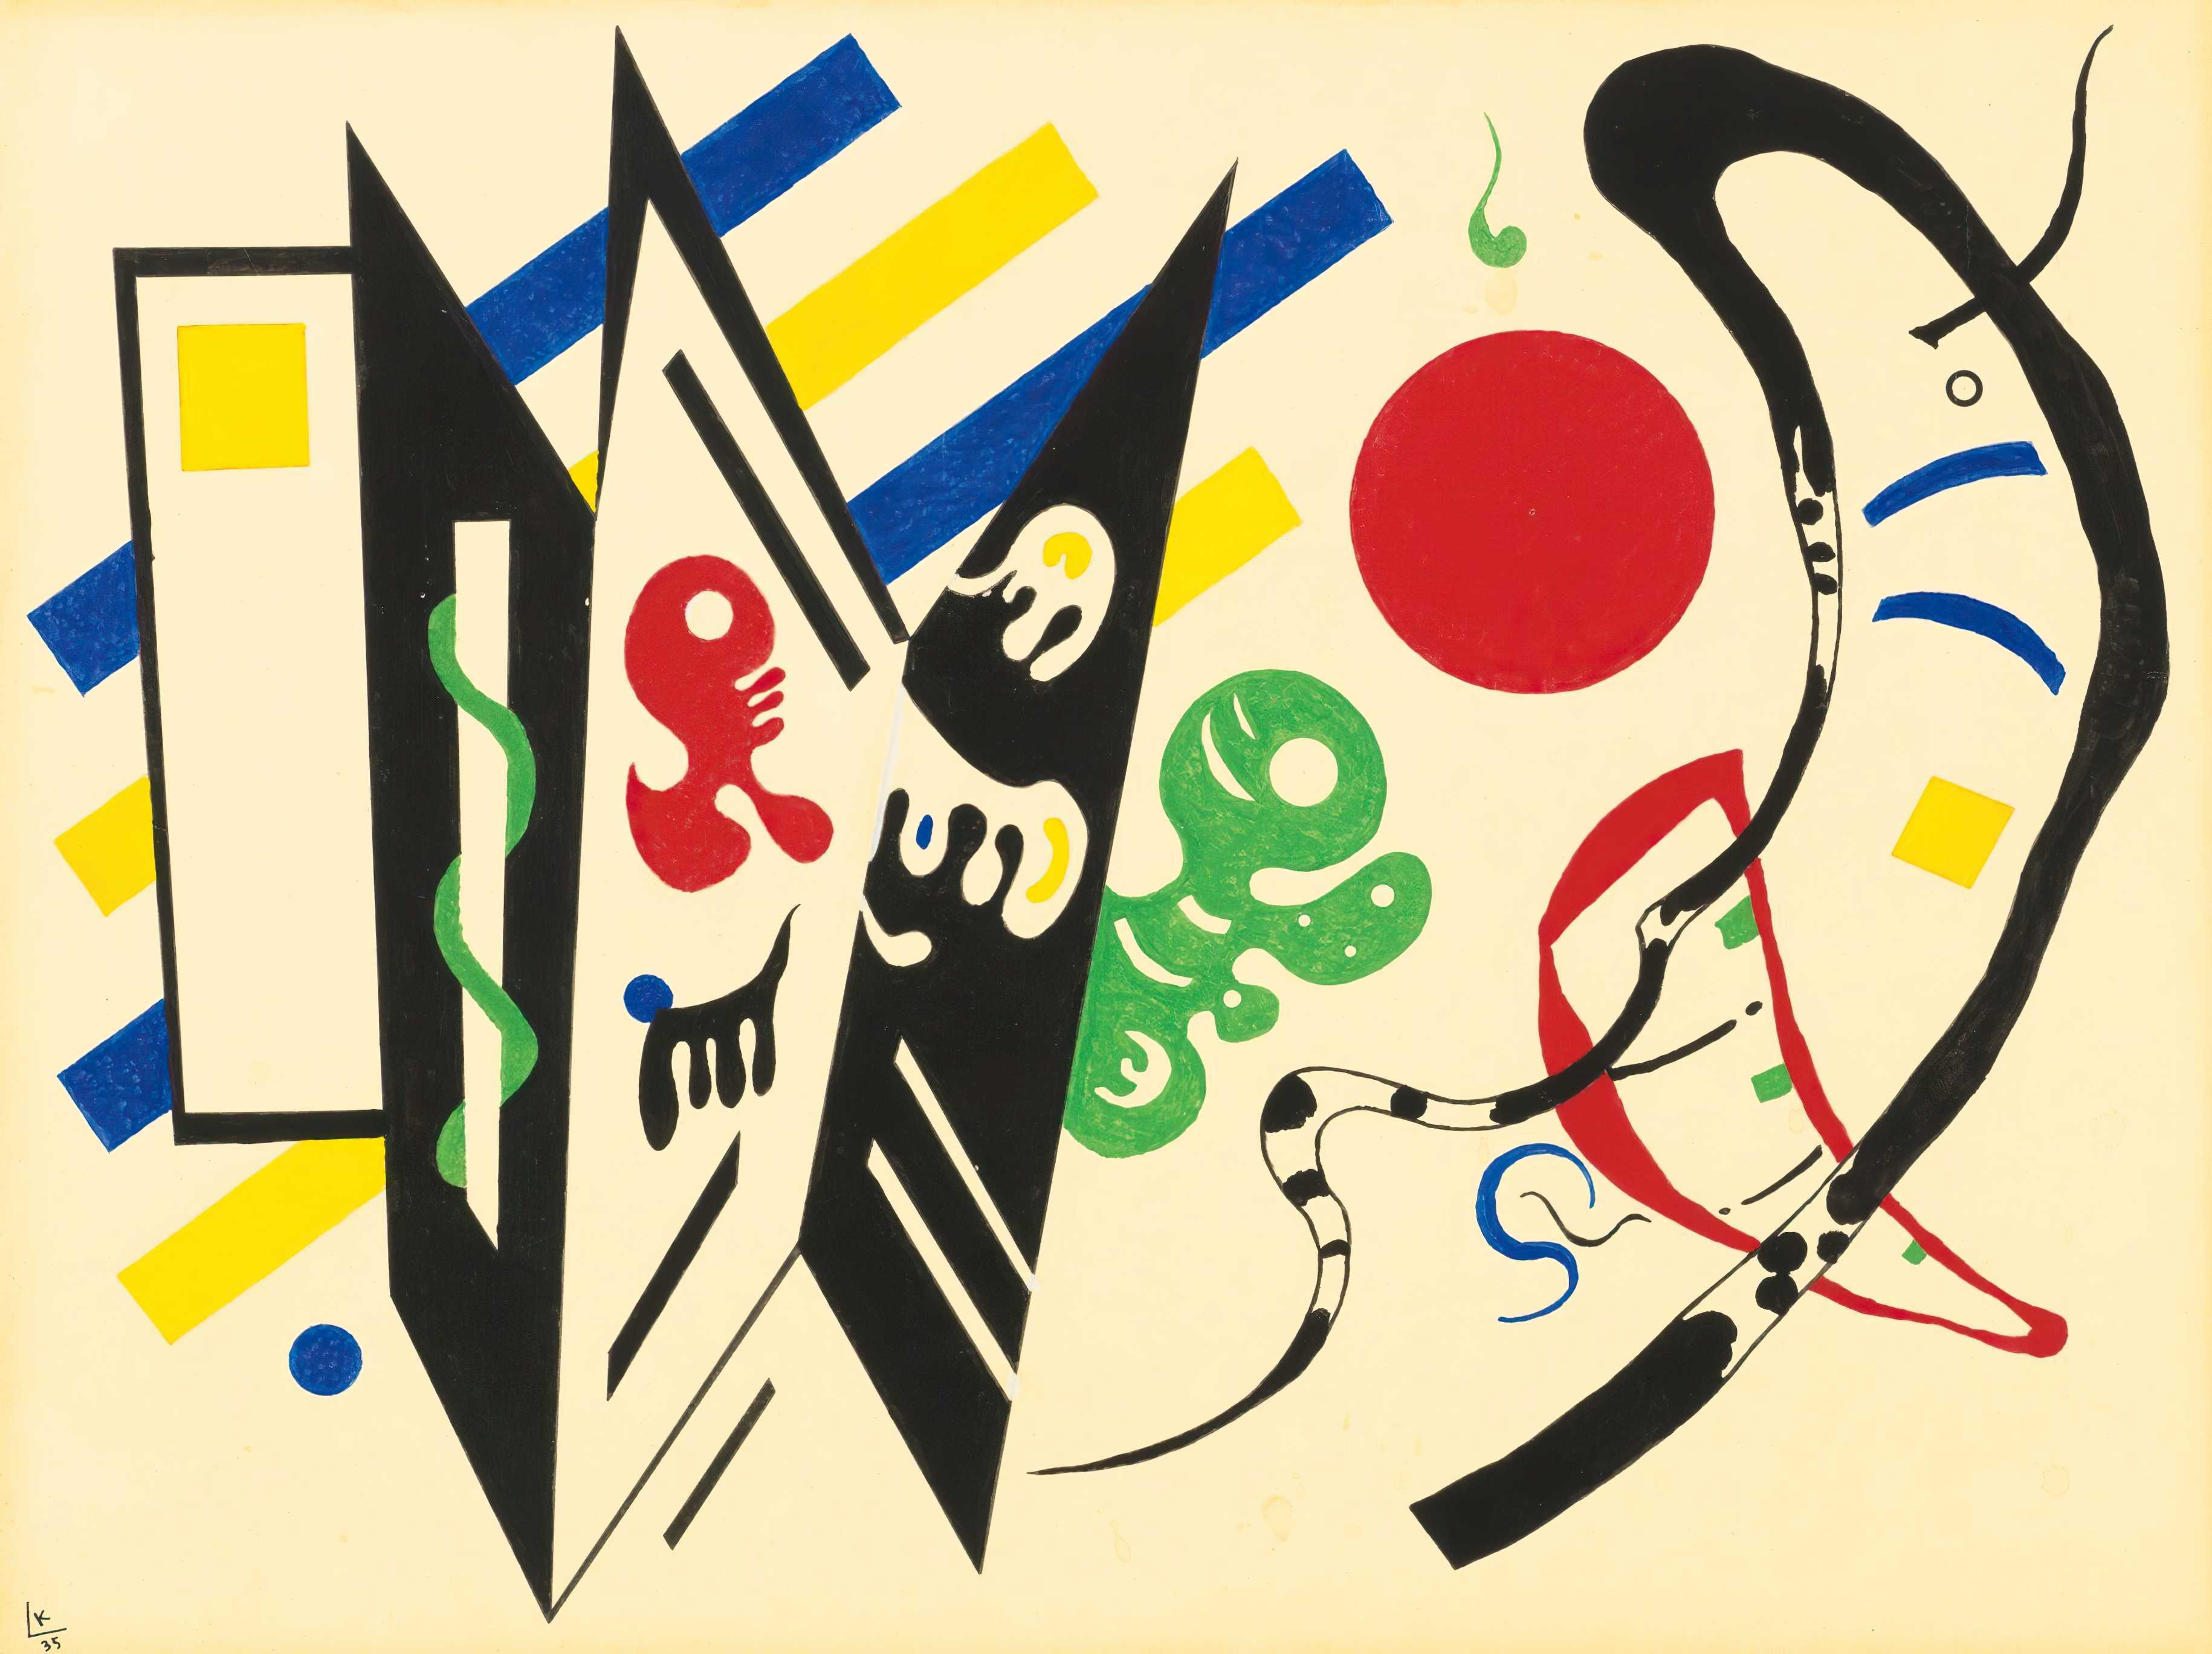 Find out more about Wassily Kandinsky - Réciproque